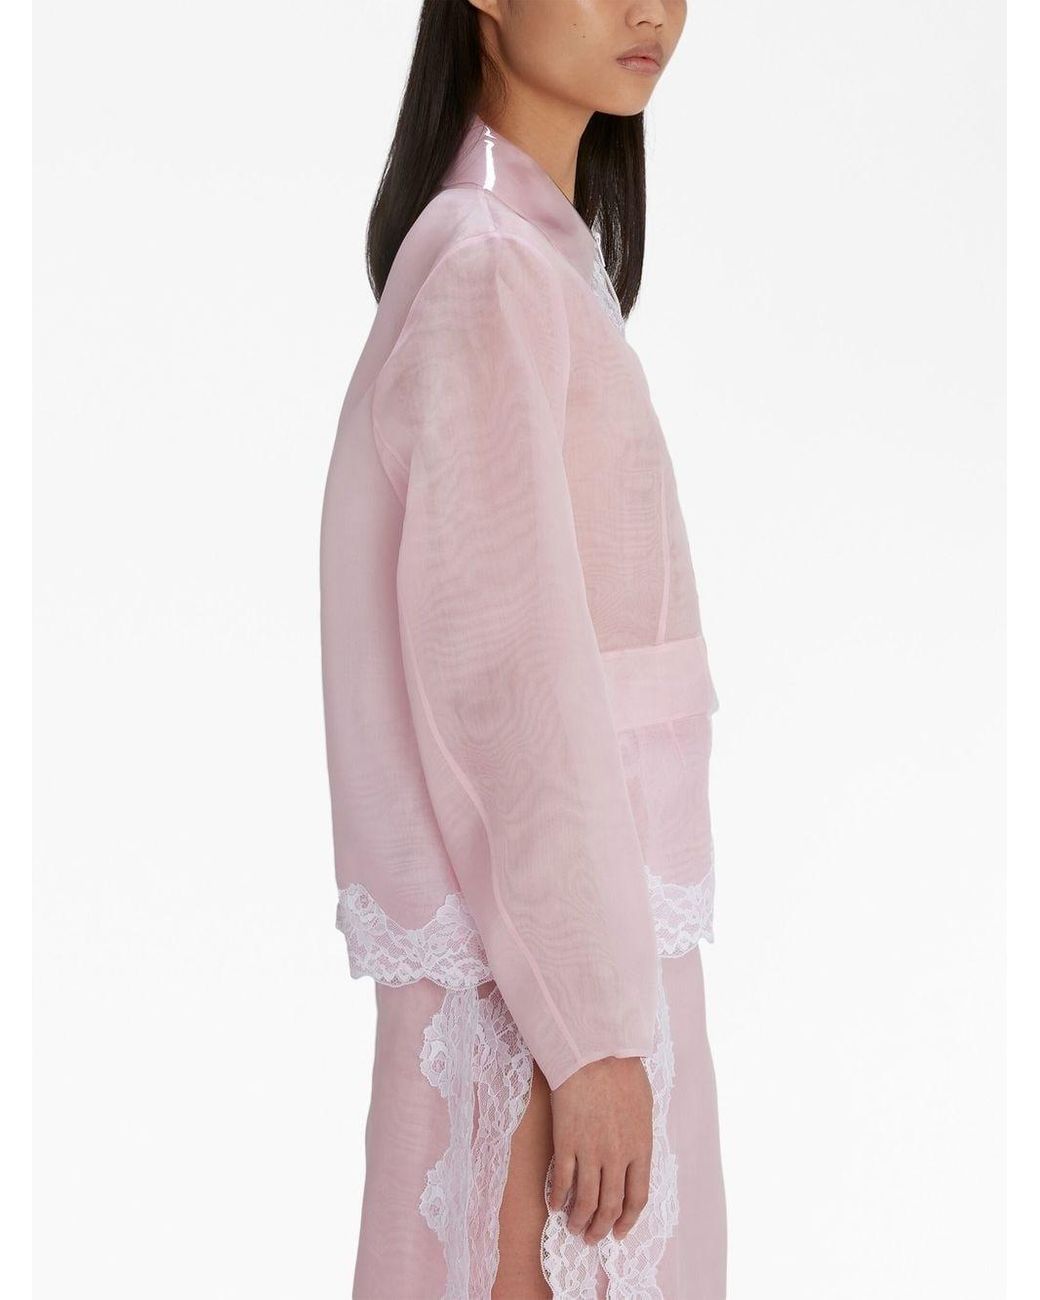 Christopher Kane Pretty In Pink Lace-trim Jacket | Lyst UK